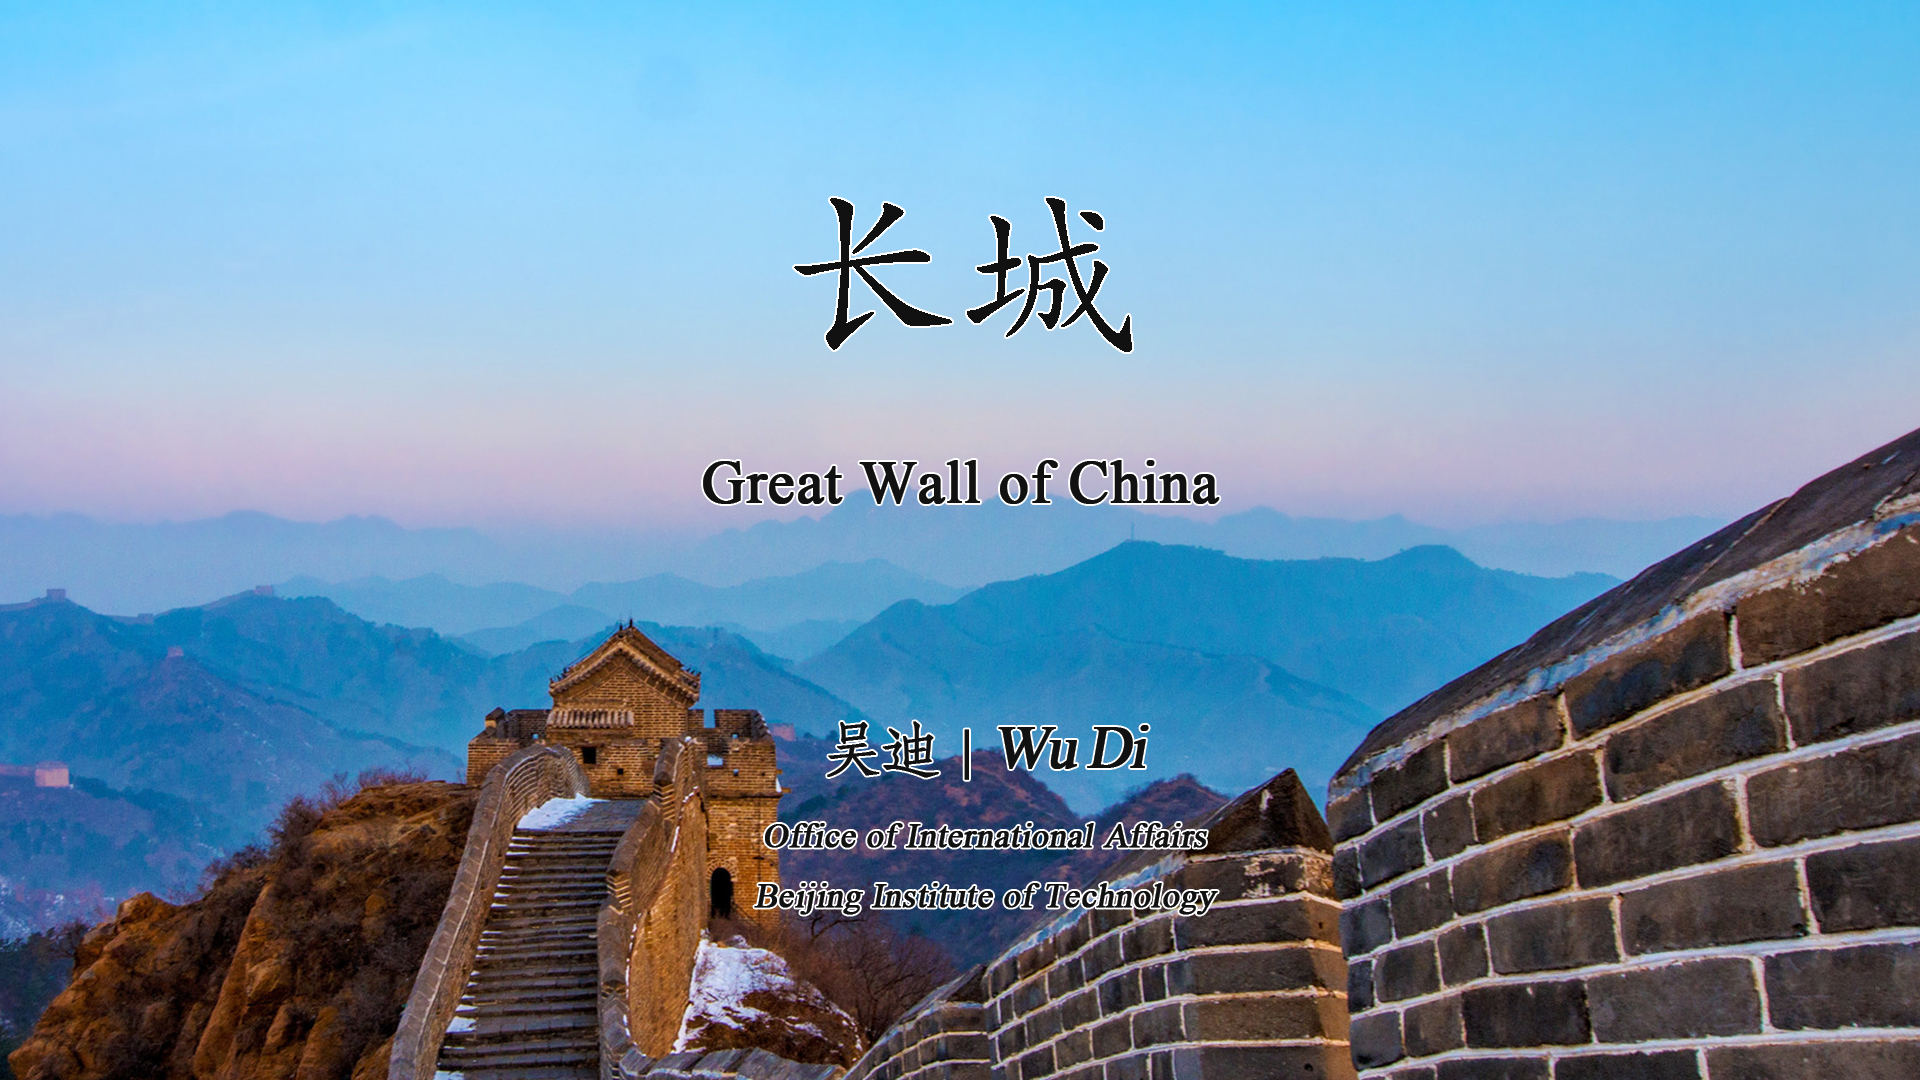 Brief Introduction: Great Wall of China